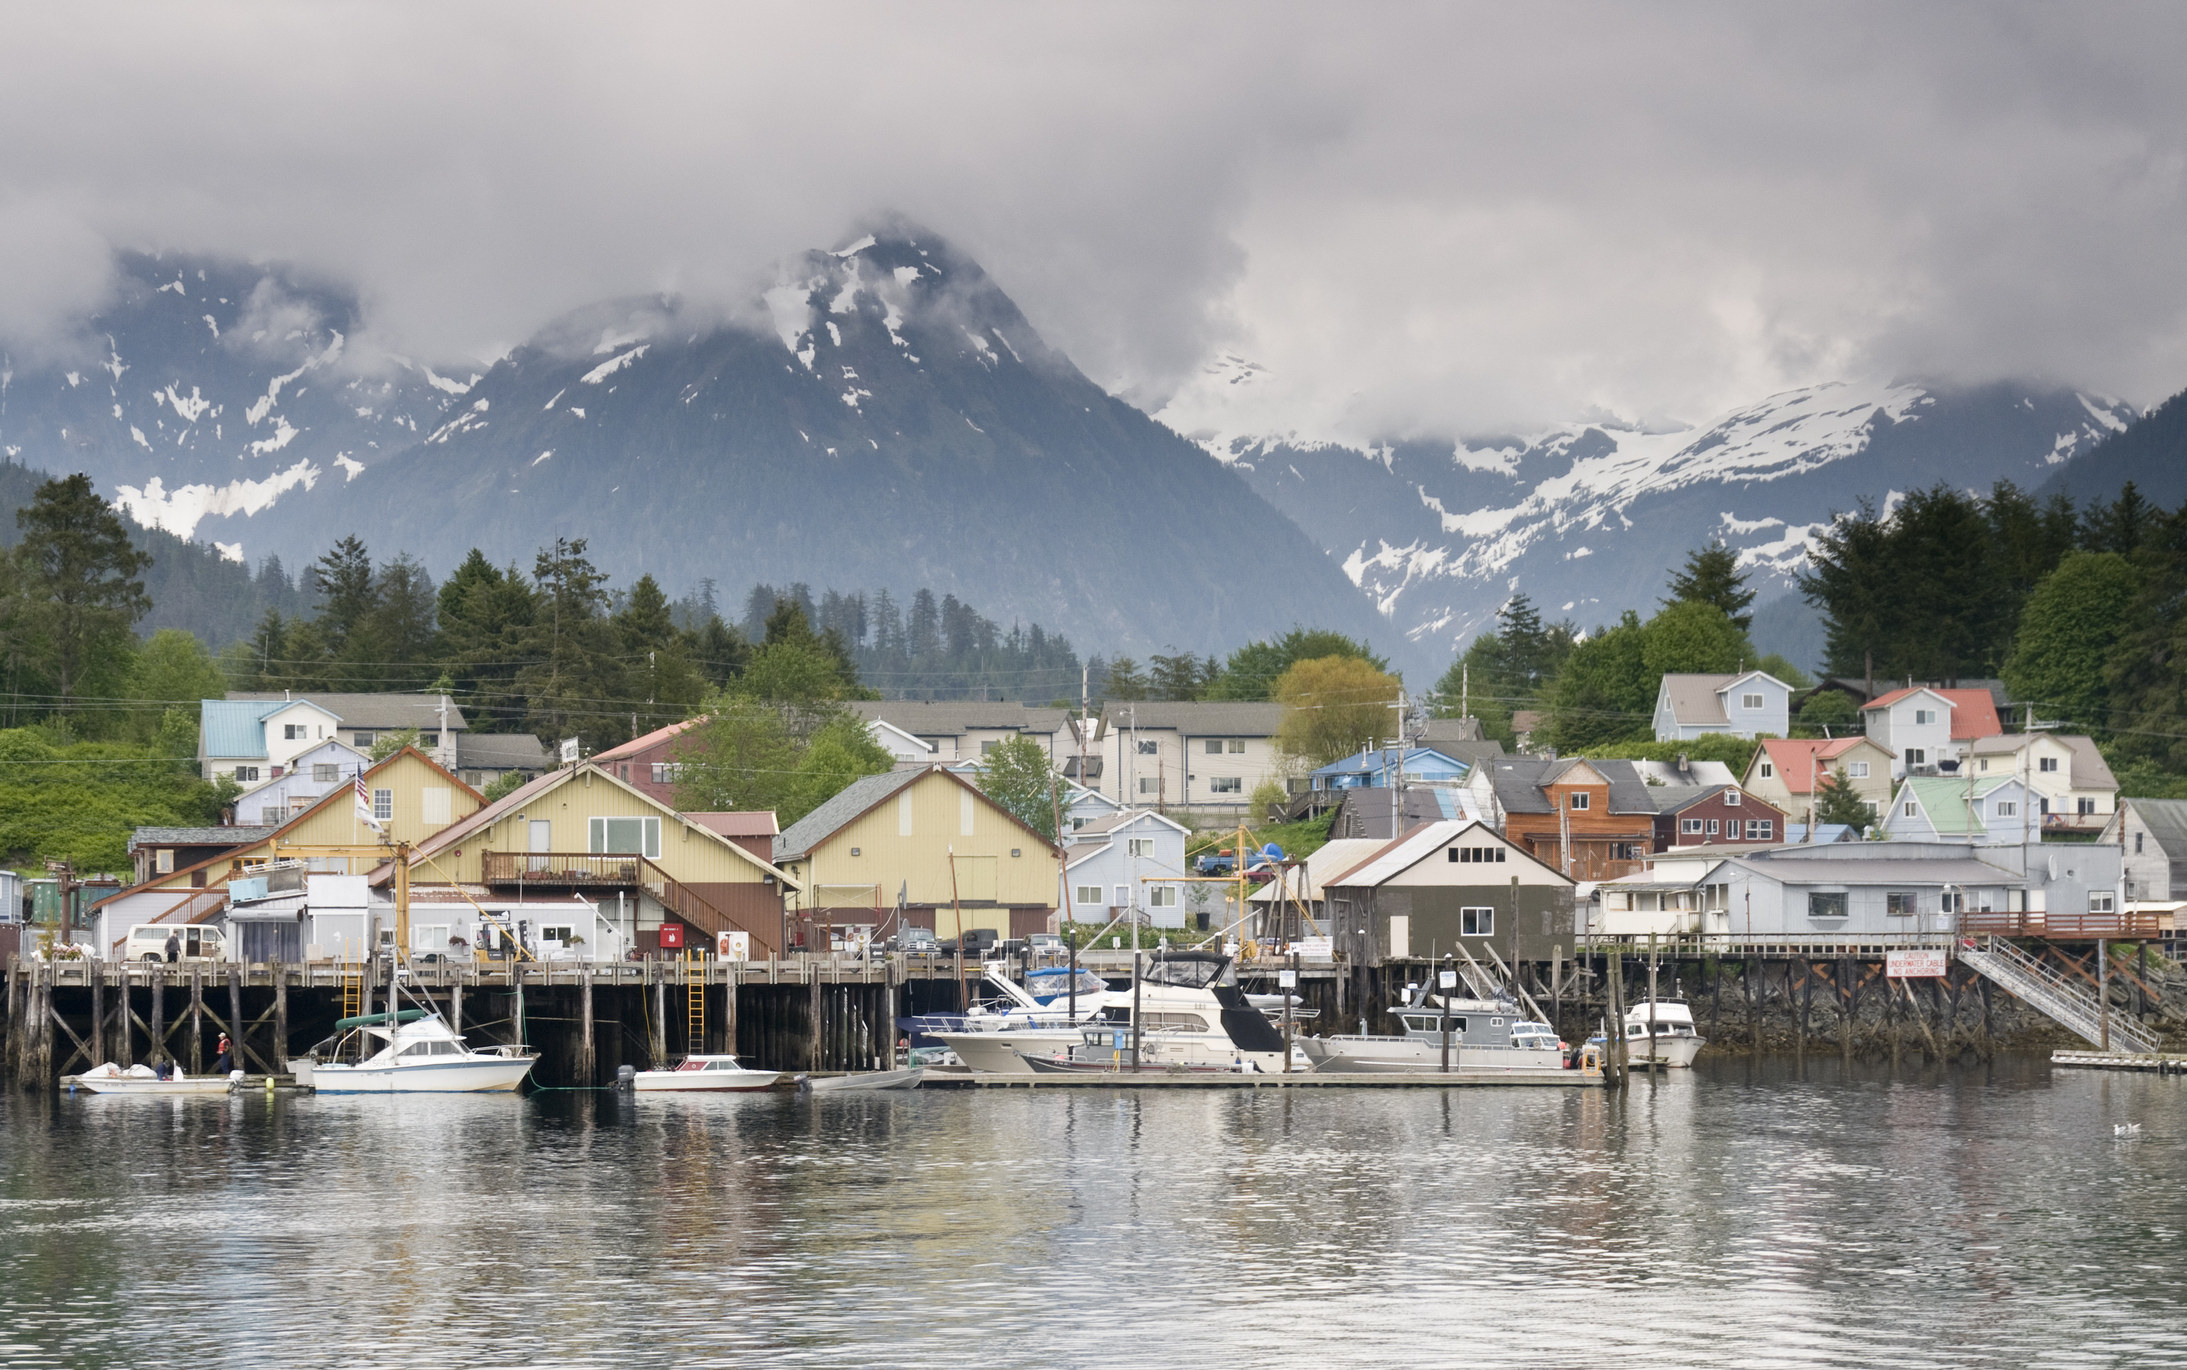 Colorful buildings and boats on a harbor with snowy mountains in the background